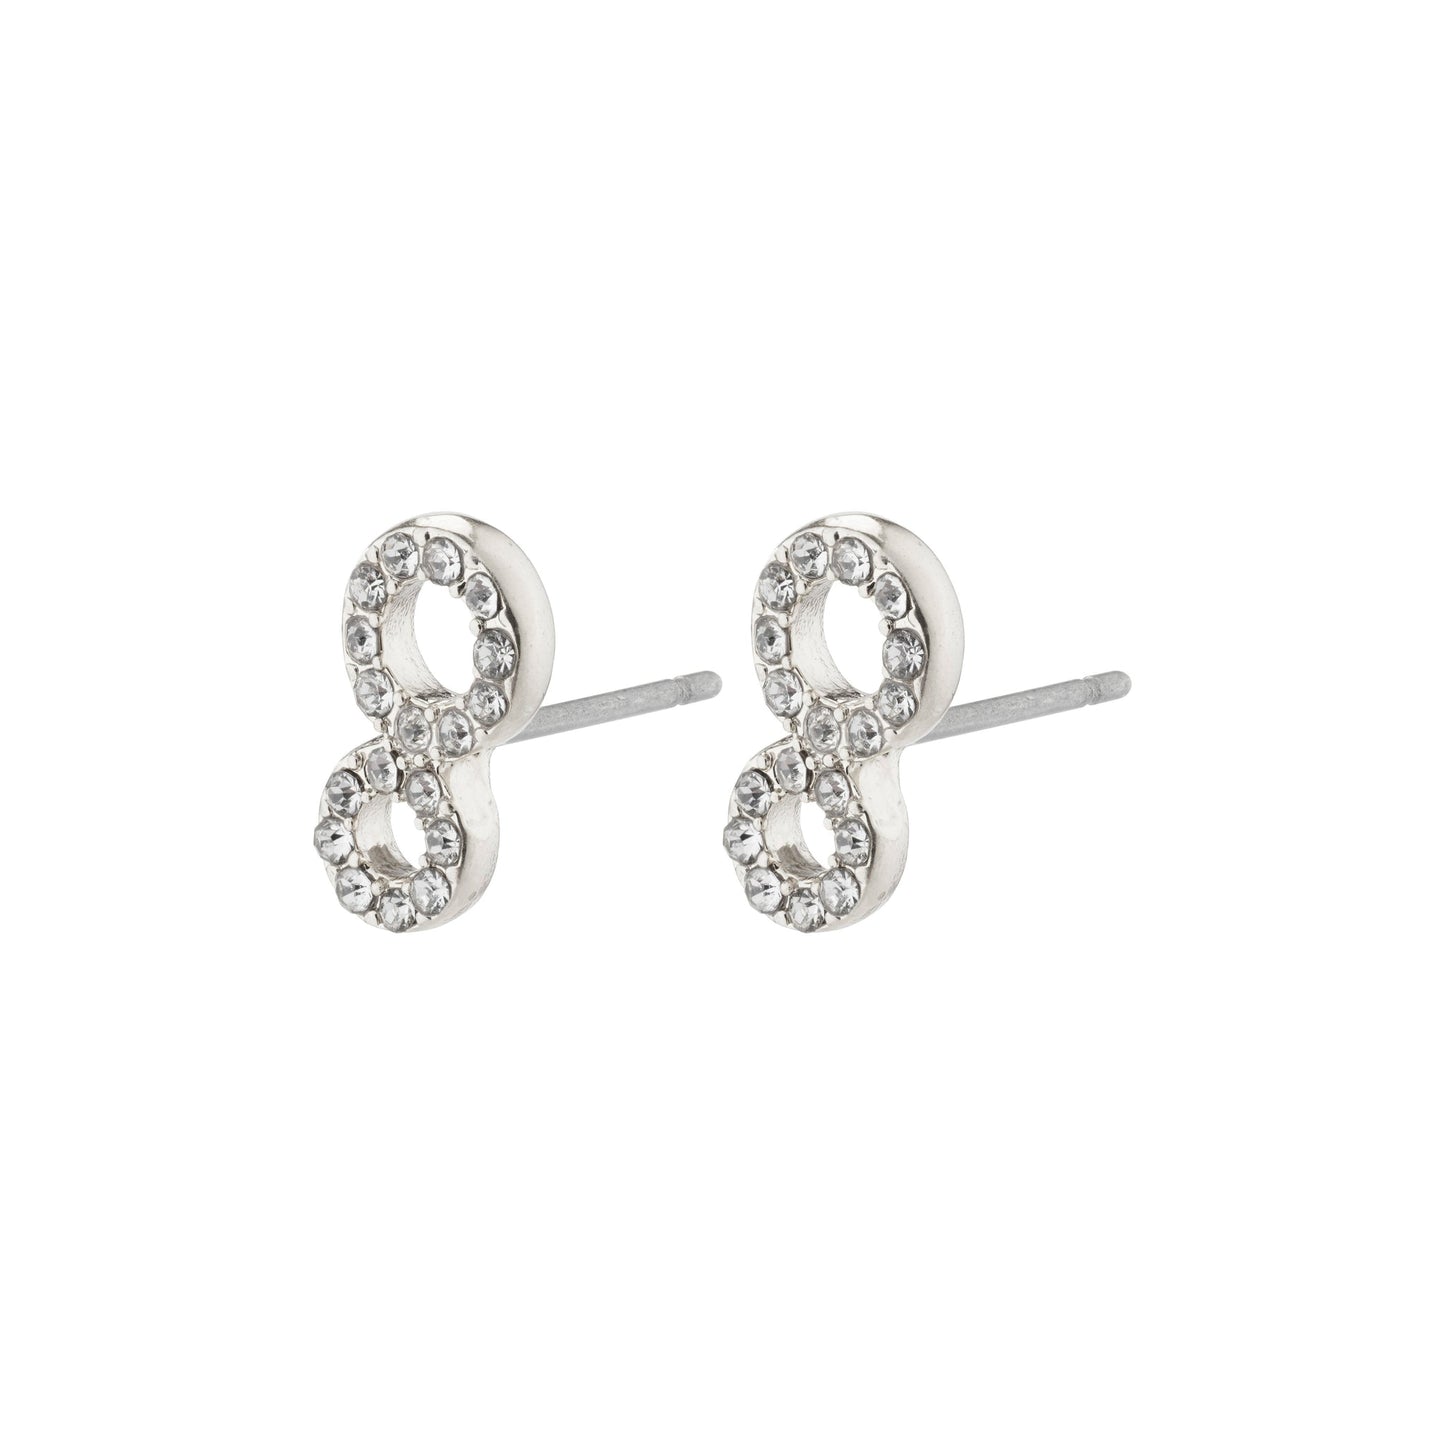 Rogue Earrings - Silver Plated